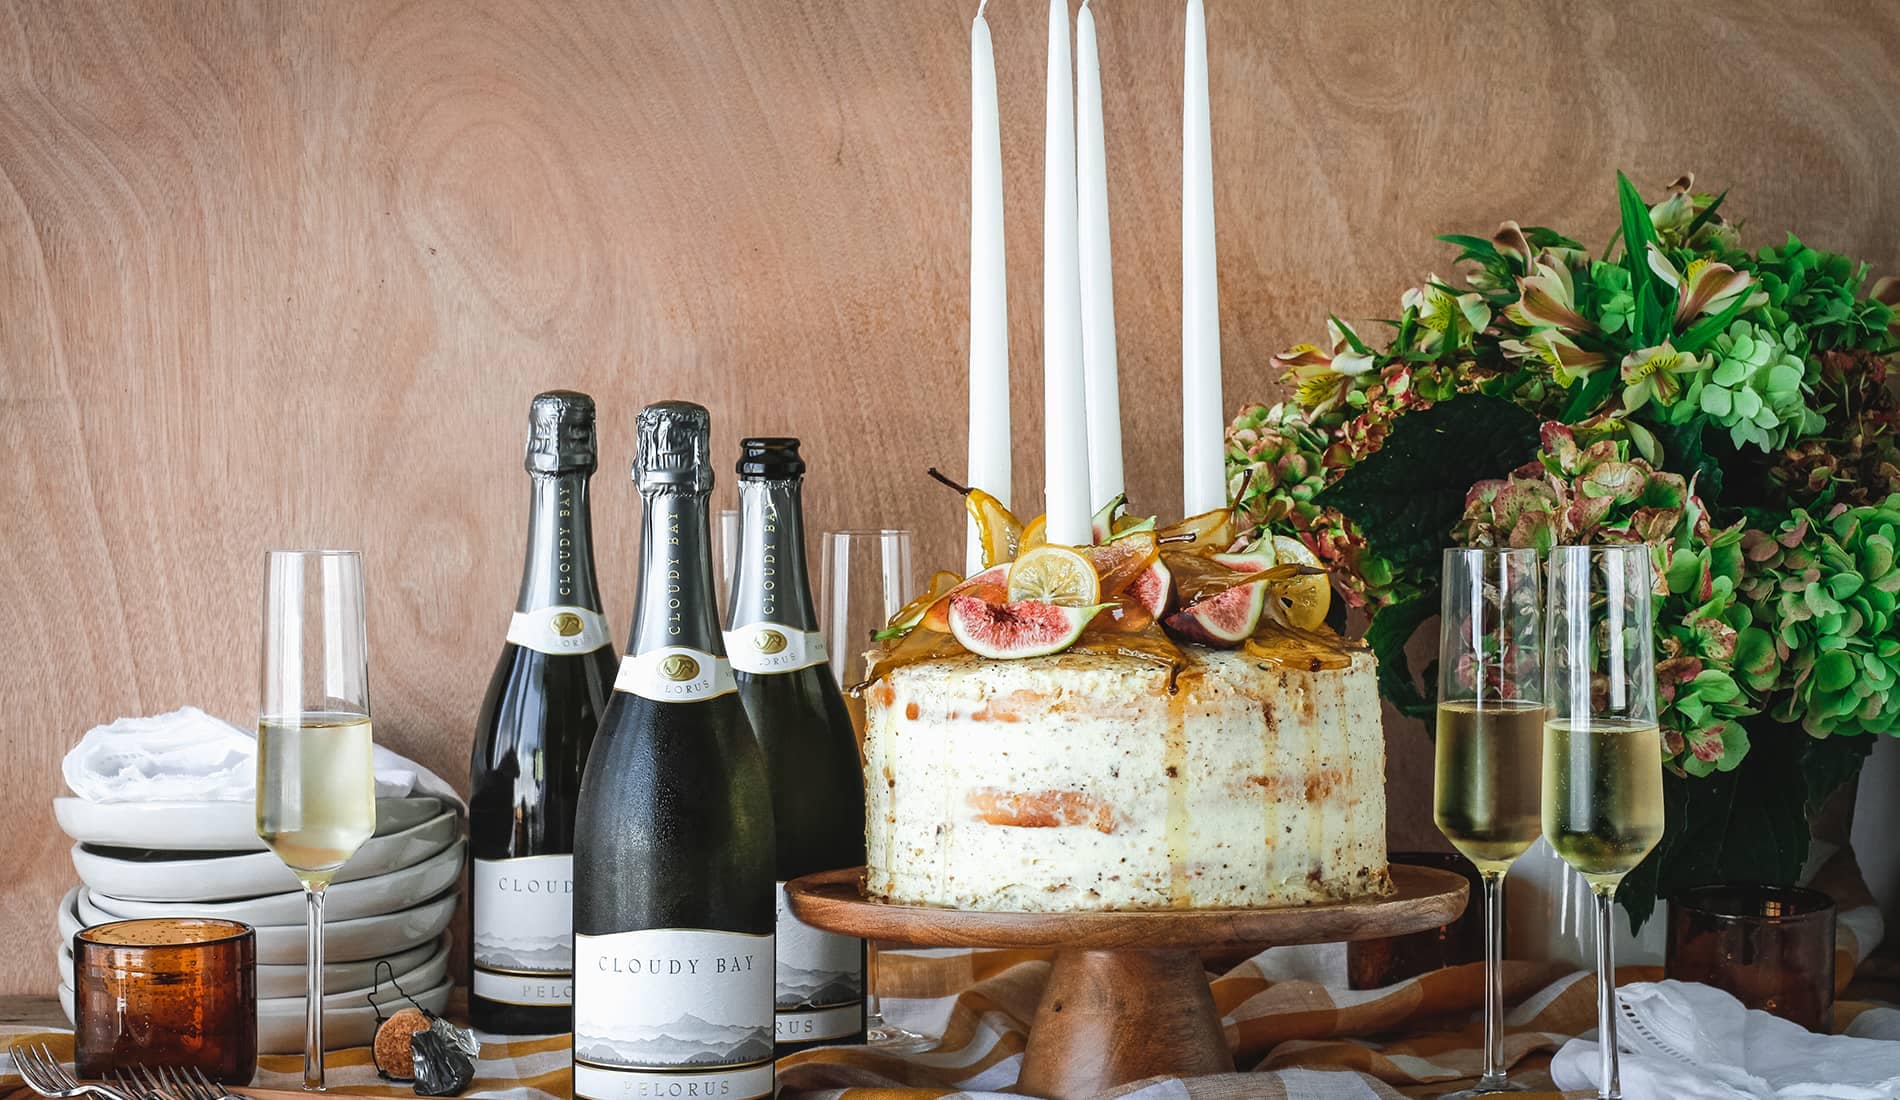 Large cake with figs beside 3 bottles and glasses of Cloudy Bay Pelorus 